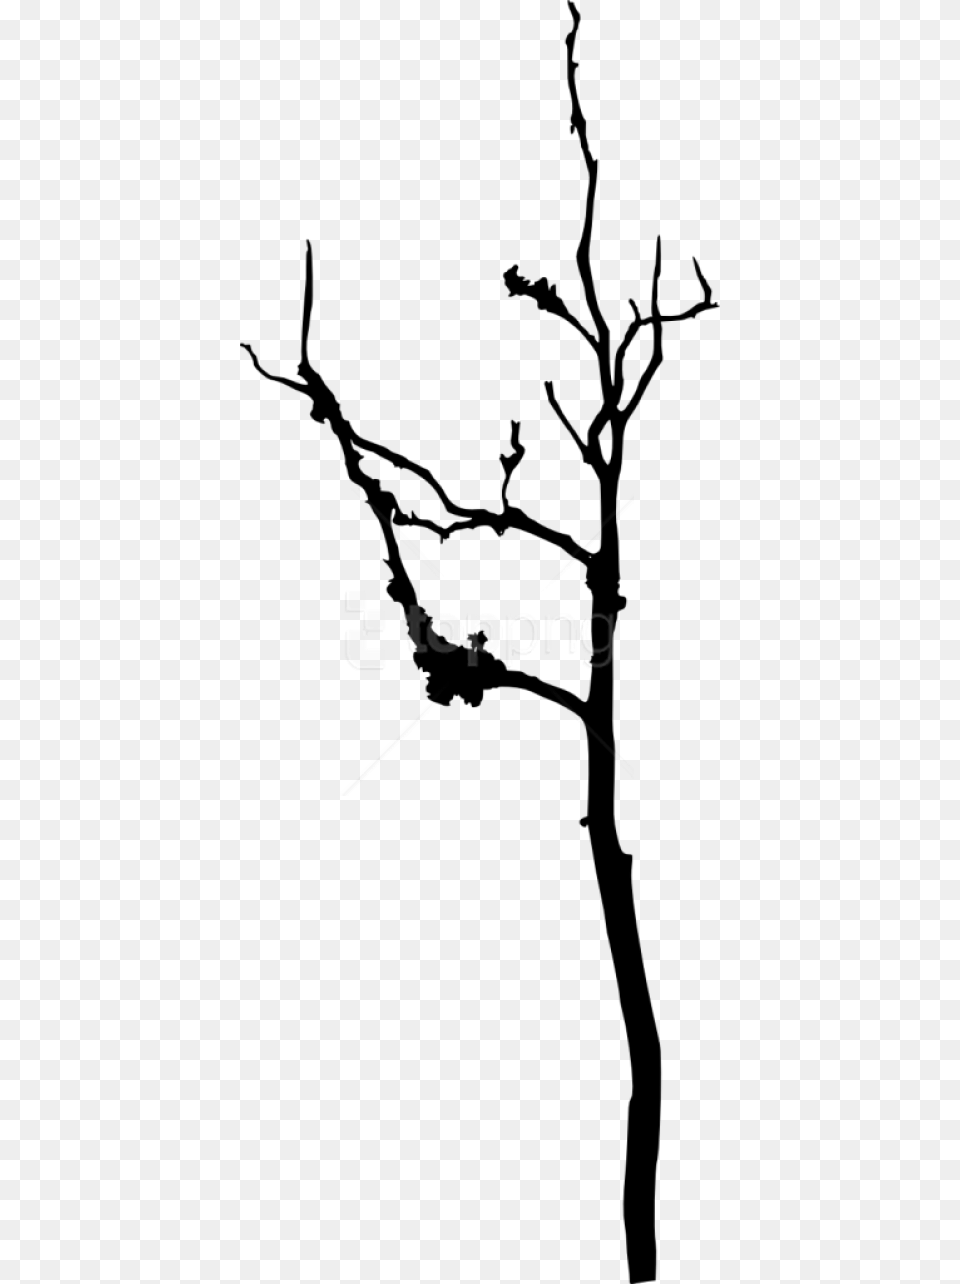 Bare Tree Silhouette Images Transparent Silhouette, Plant, Bow, Weapon, Stencil Free Png